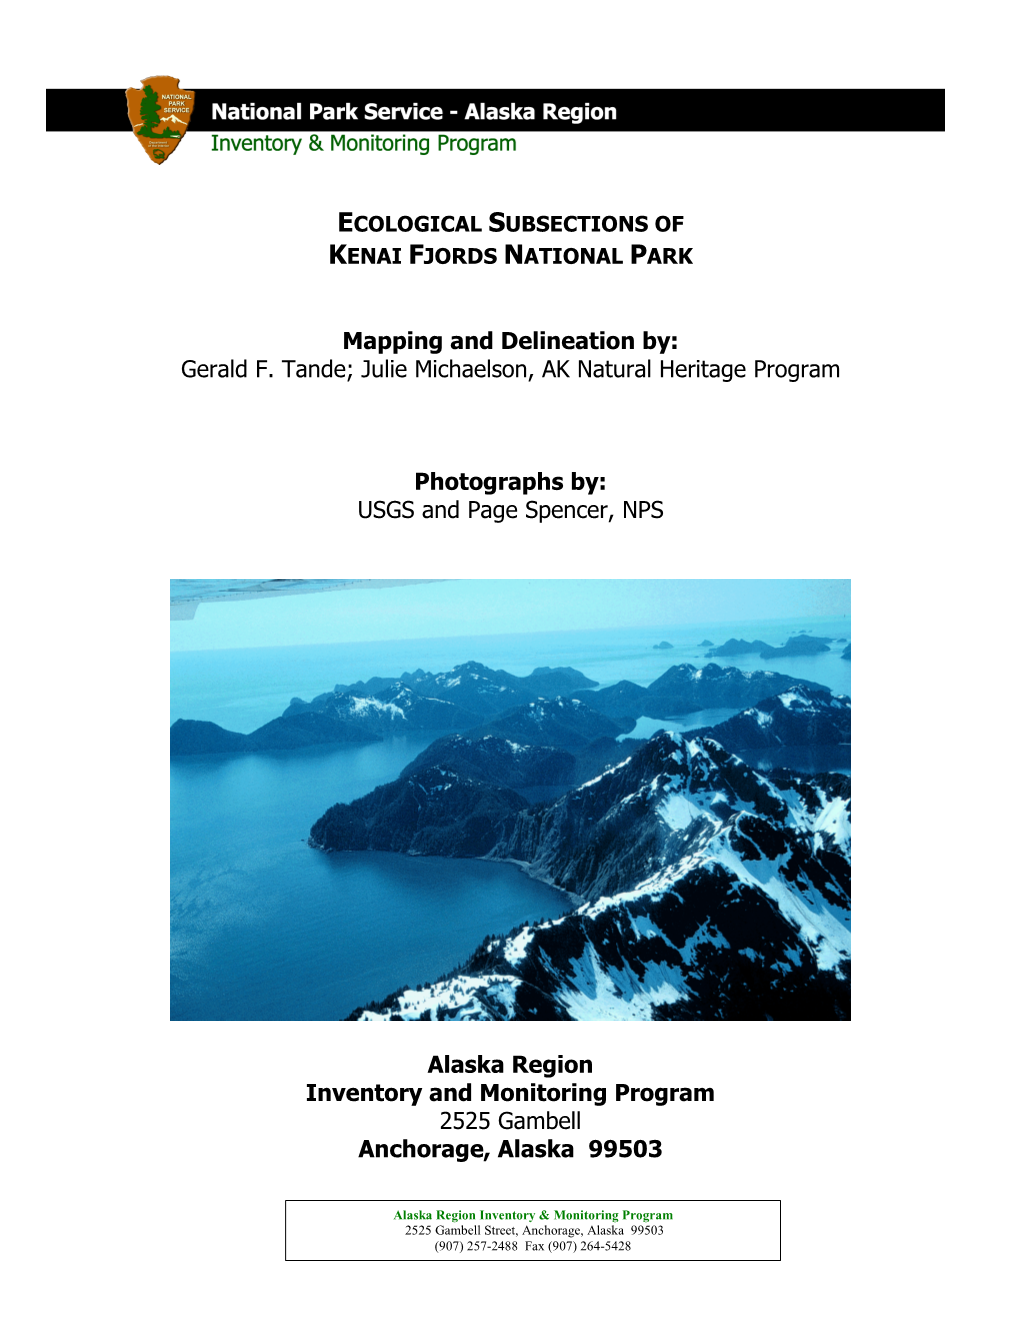 Ecological Subsections of Kenai Fjords National Park